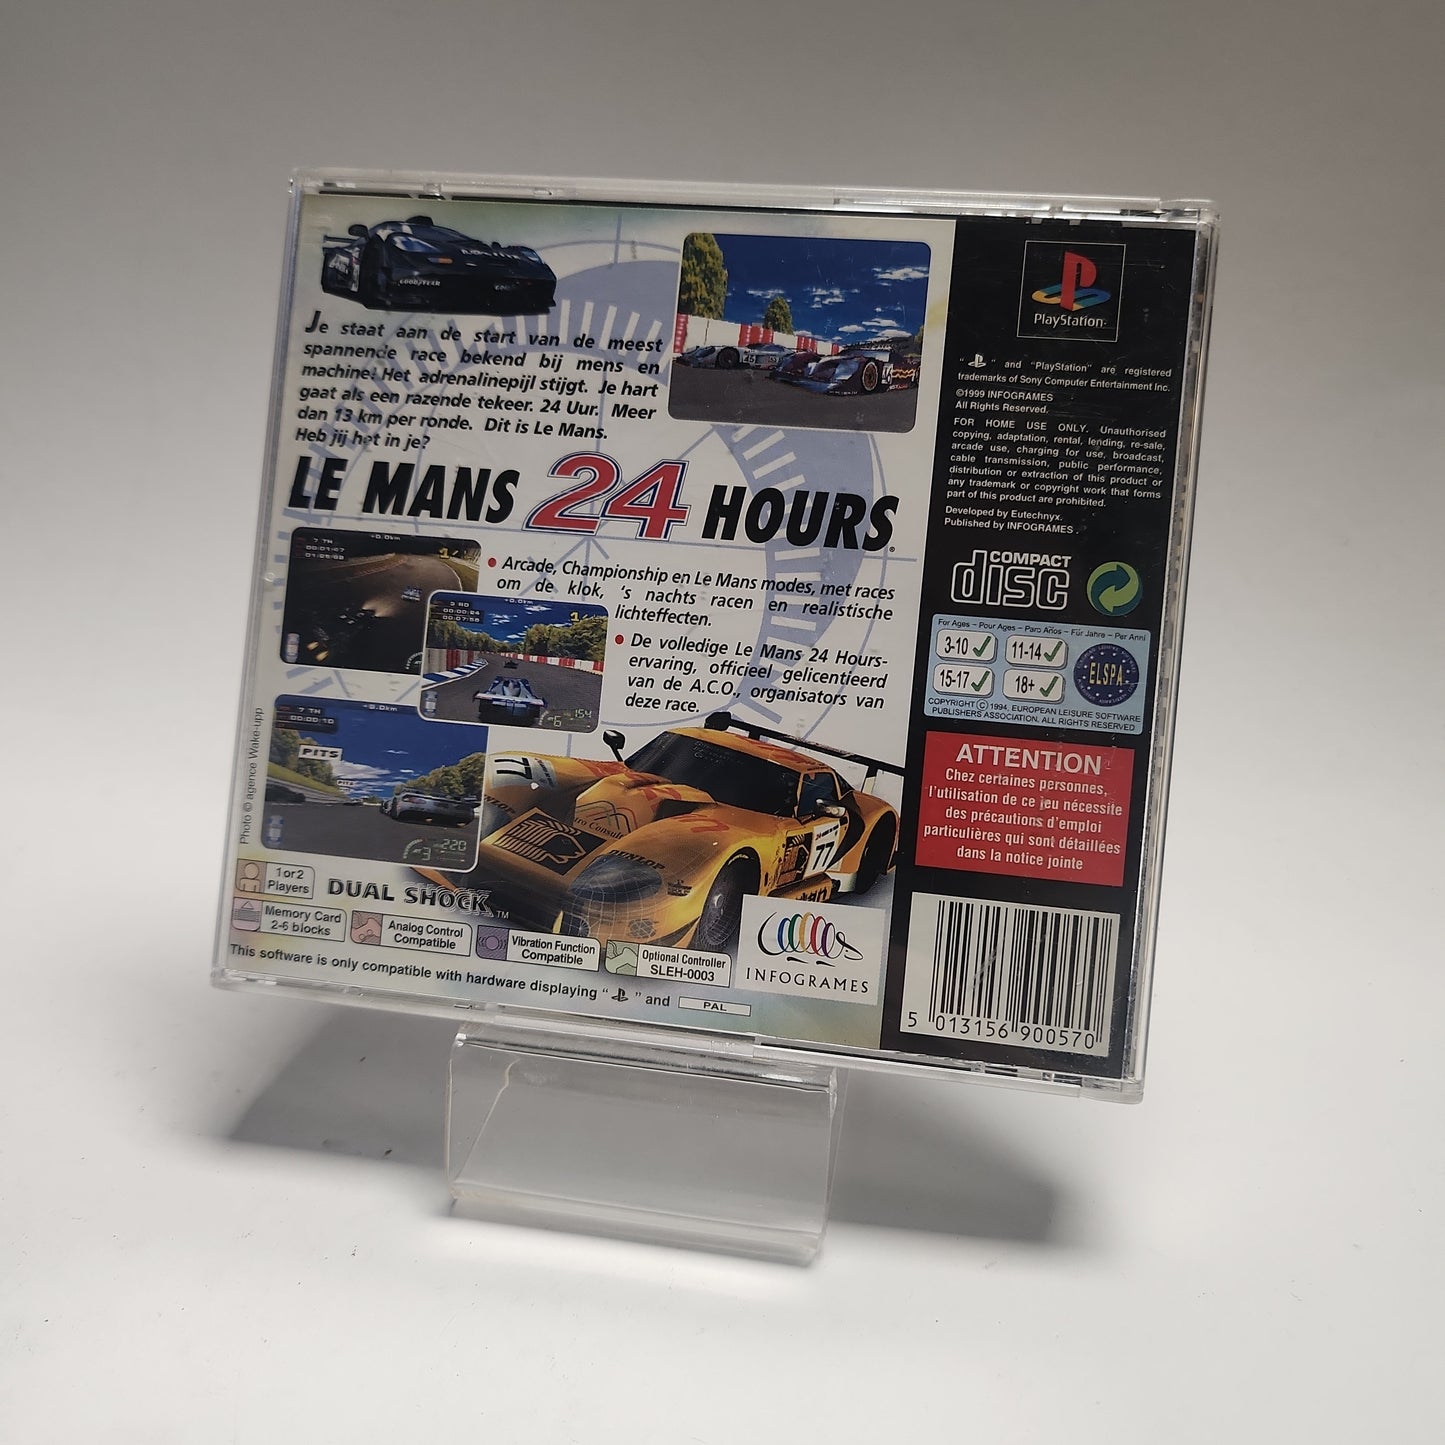 Le Mans 24 Hours Playstation 1